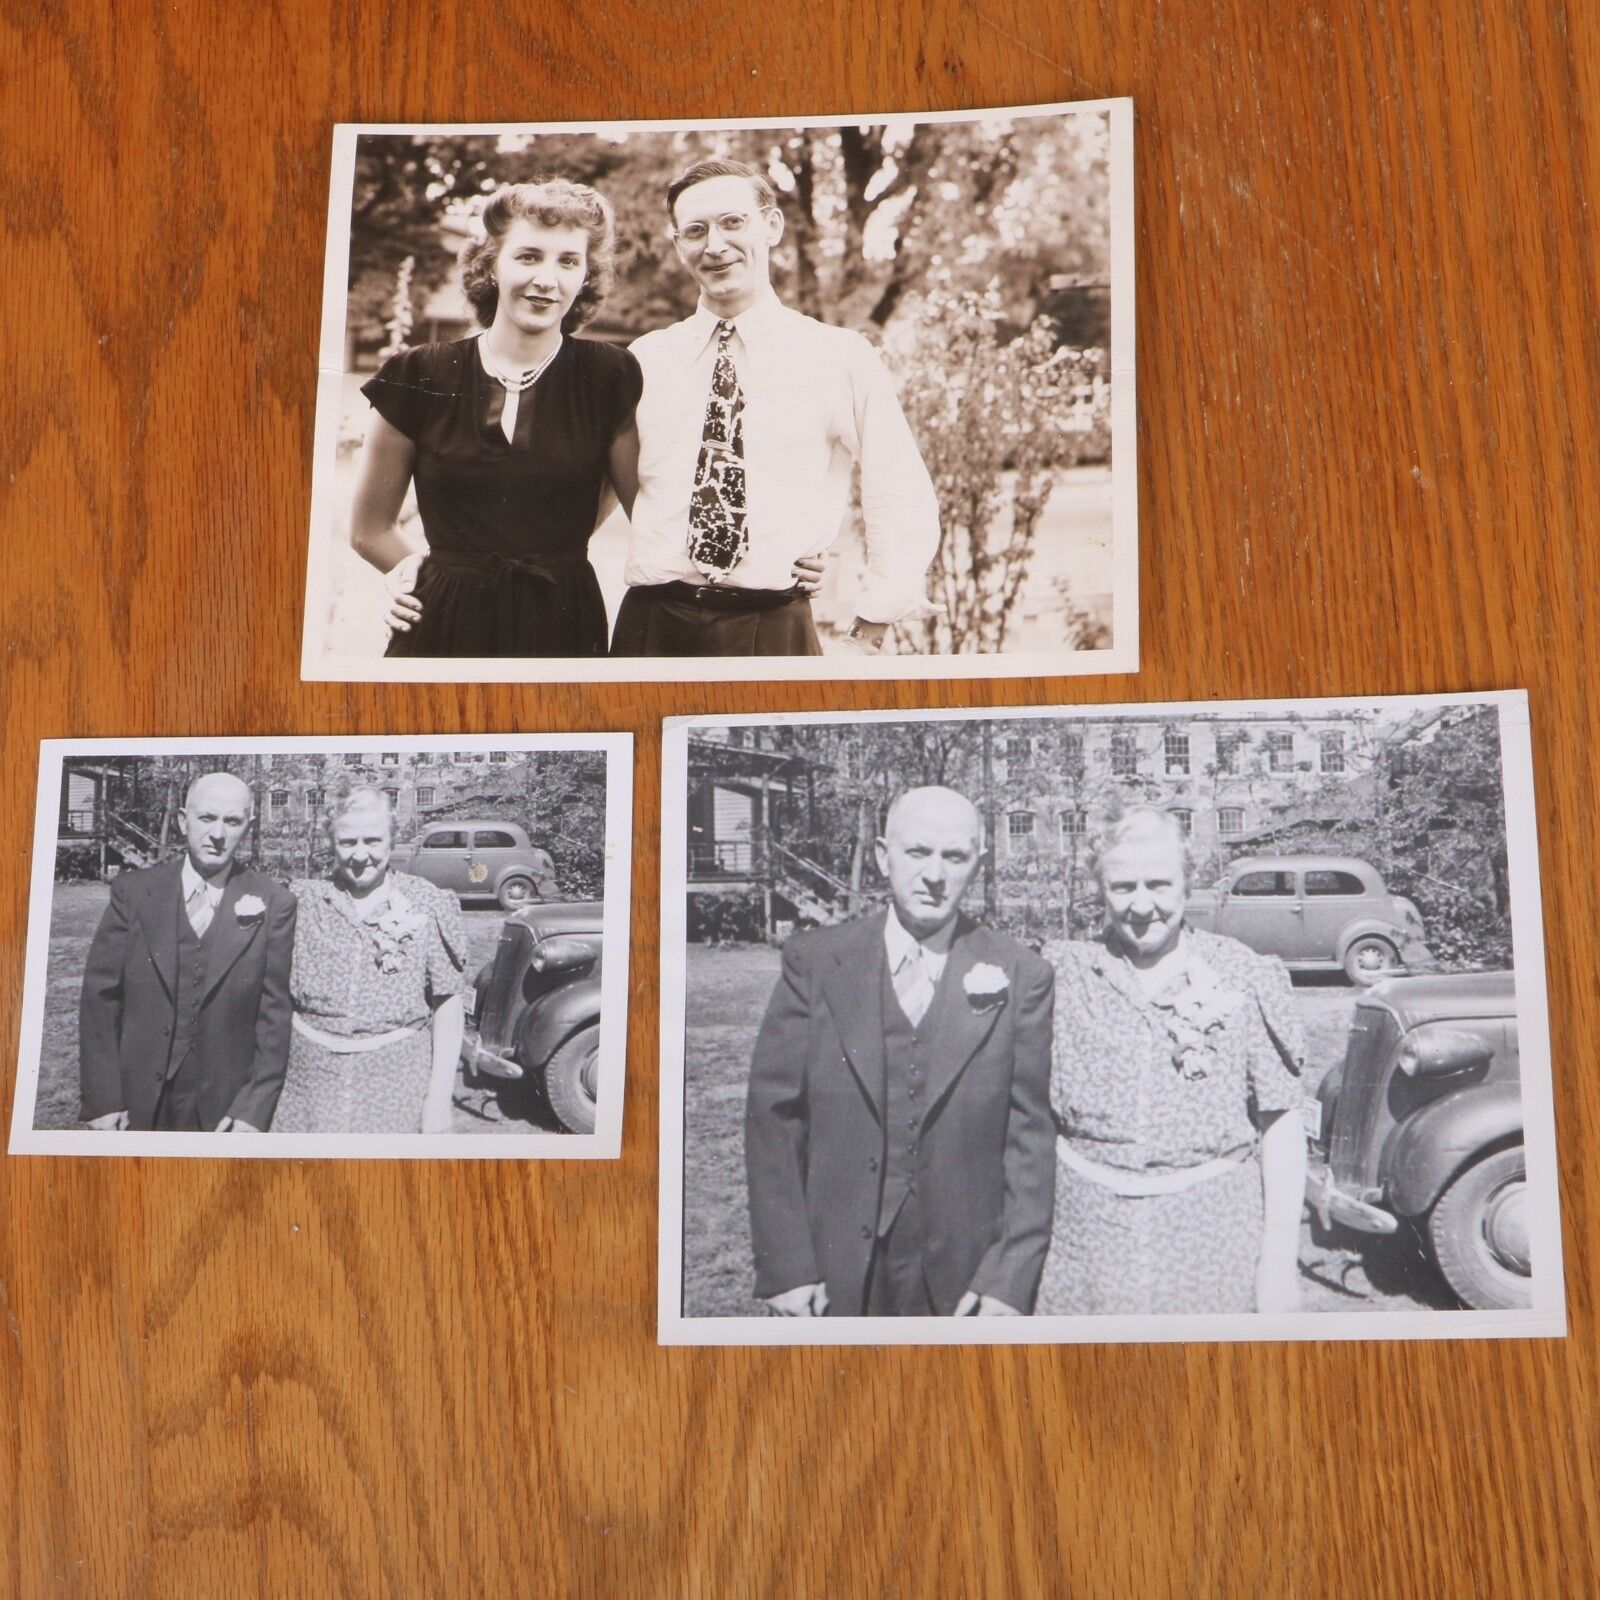 3 Vintage Pictures Married Couple Old & Young Early 20th Century